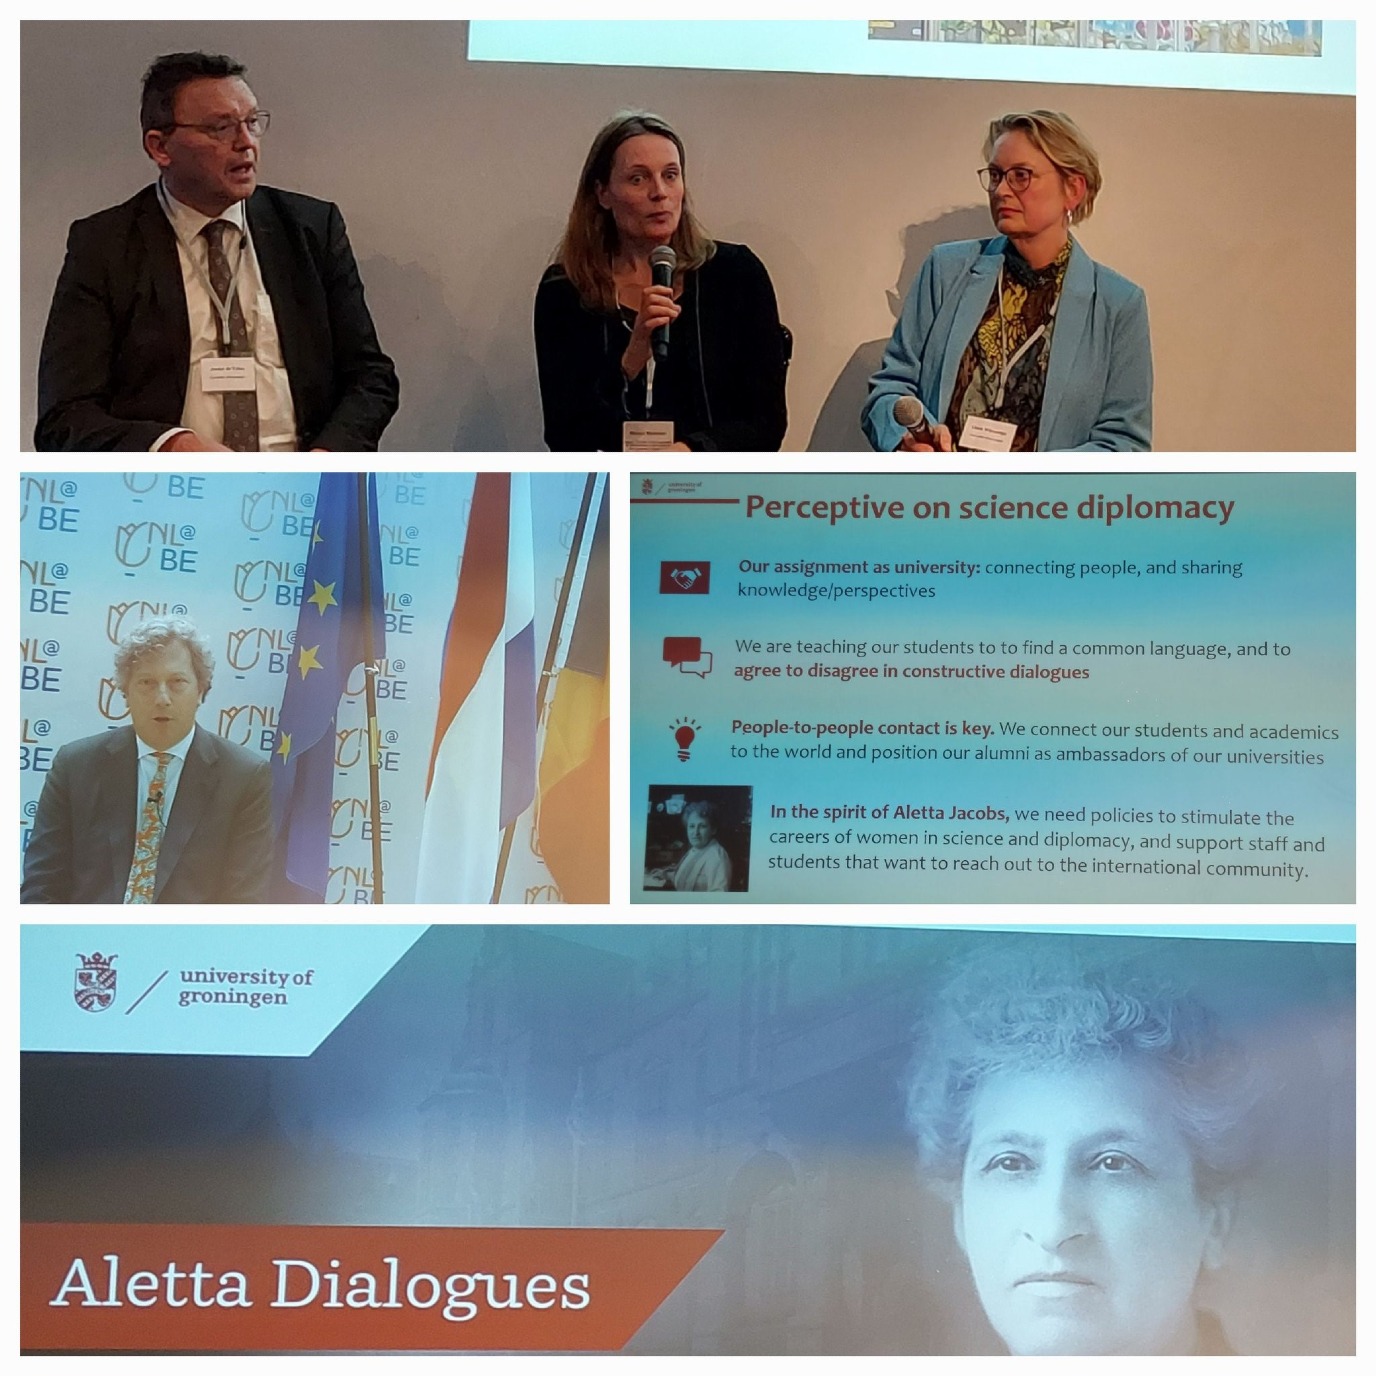 Science diplomance takes centre stage at Aletta Dialogue in Brussels